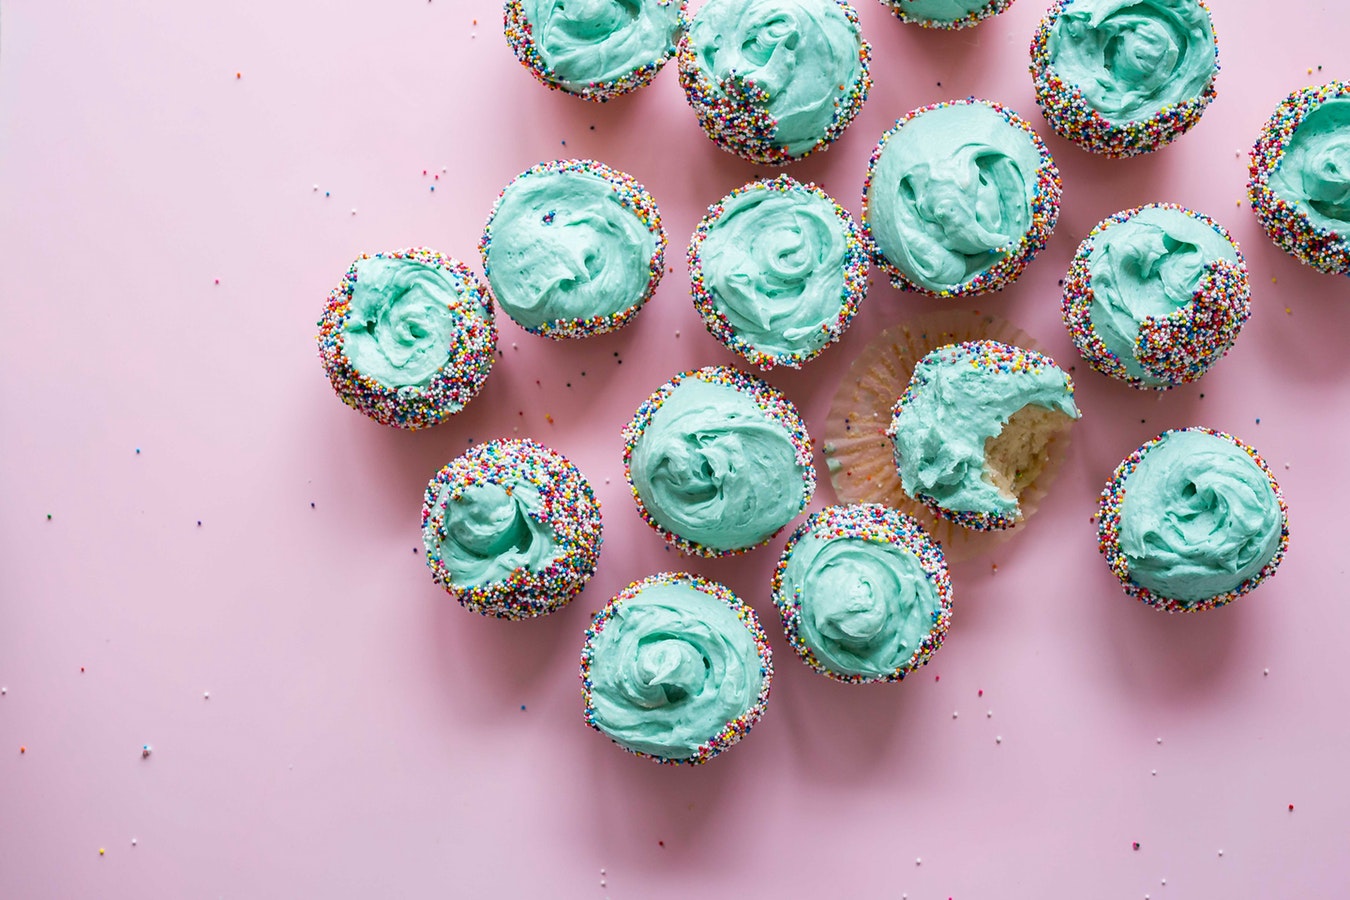 24 lessons learned by 24 cupcakes